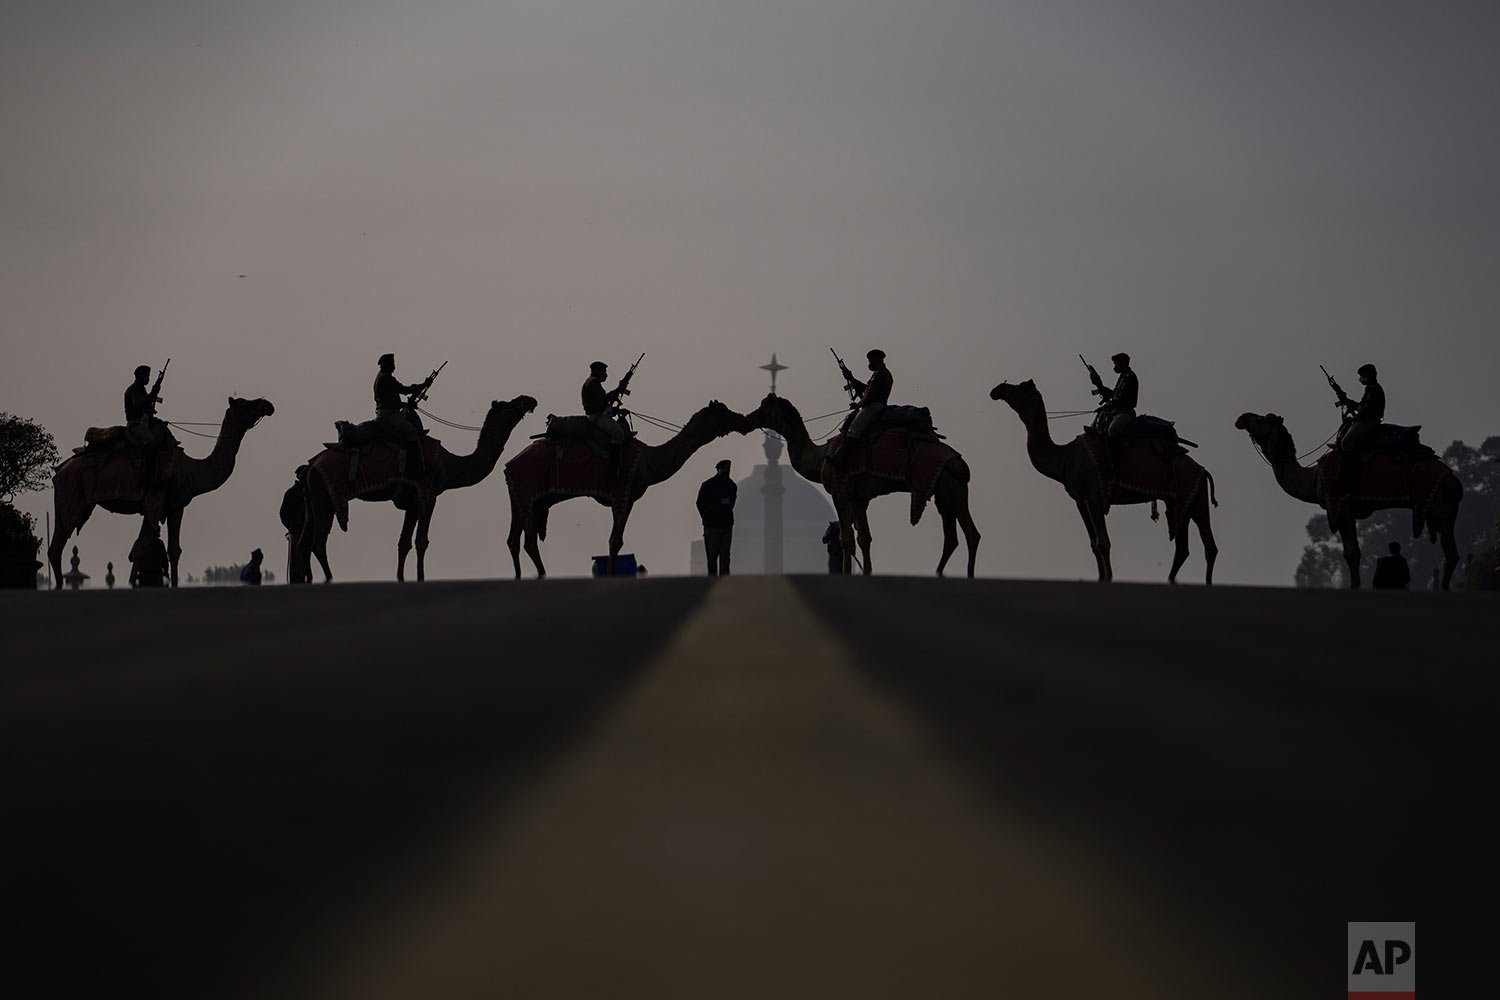  Camel-mounted soldiers stand in formation during rehearsals for the upcoming Beating Retreat ceremony at Raisina hill which houses India's most important offices and the presidential palace in New Delhi, India, Wednesday, Jan. 19, 2022. (AP Photo/Al